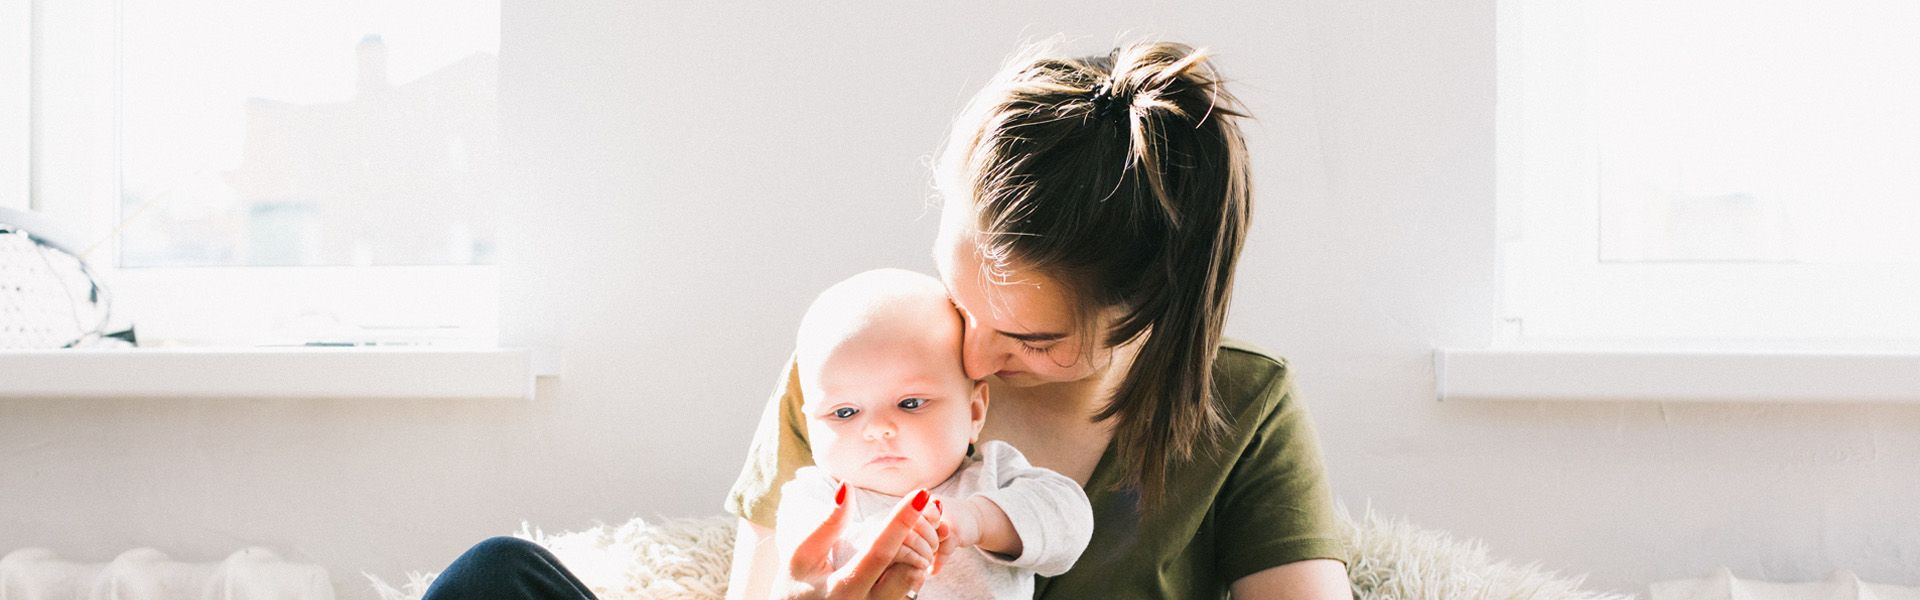 4 Ways New Moms Can Fight Overwhelm and Ask For Help